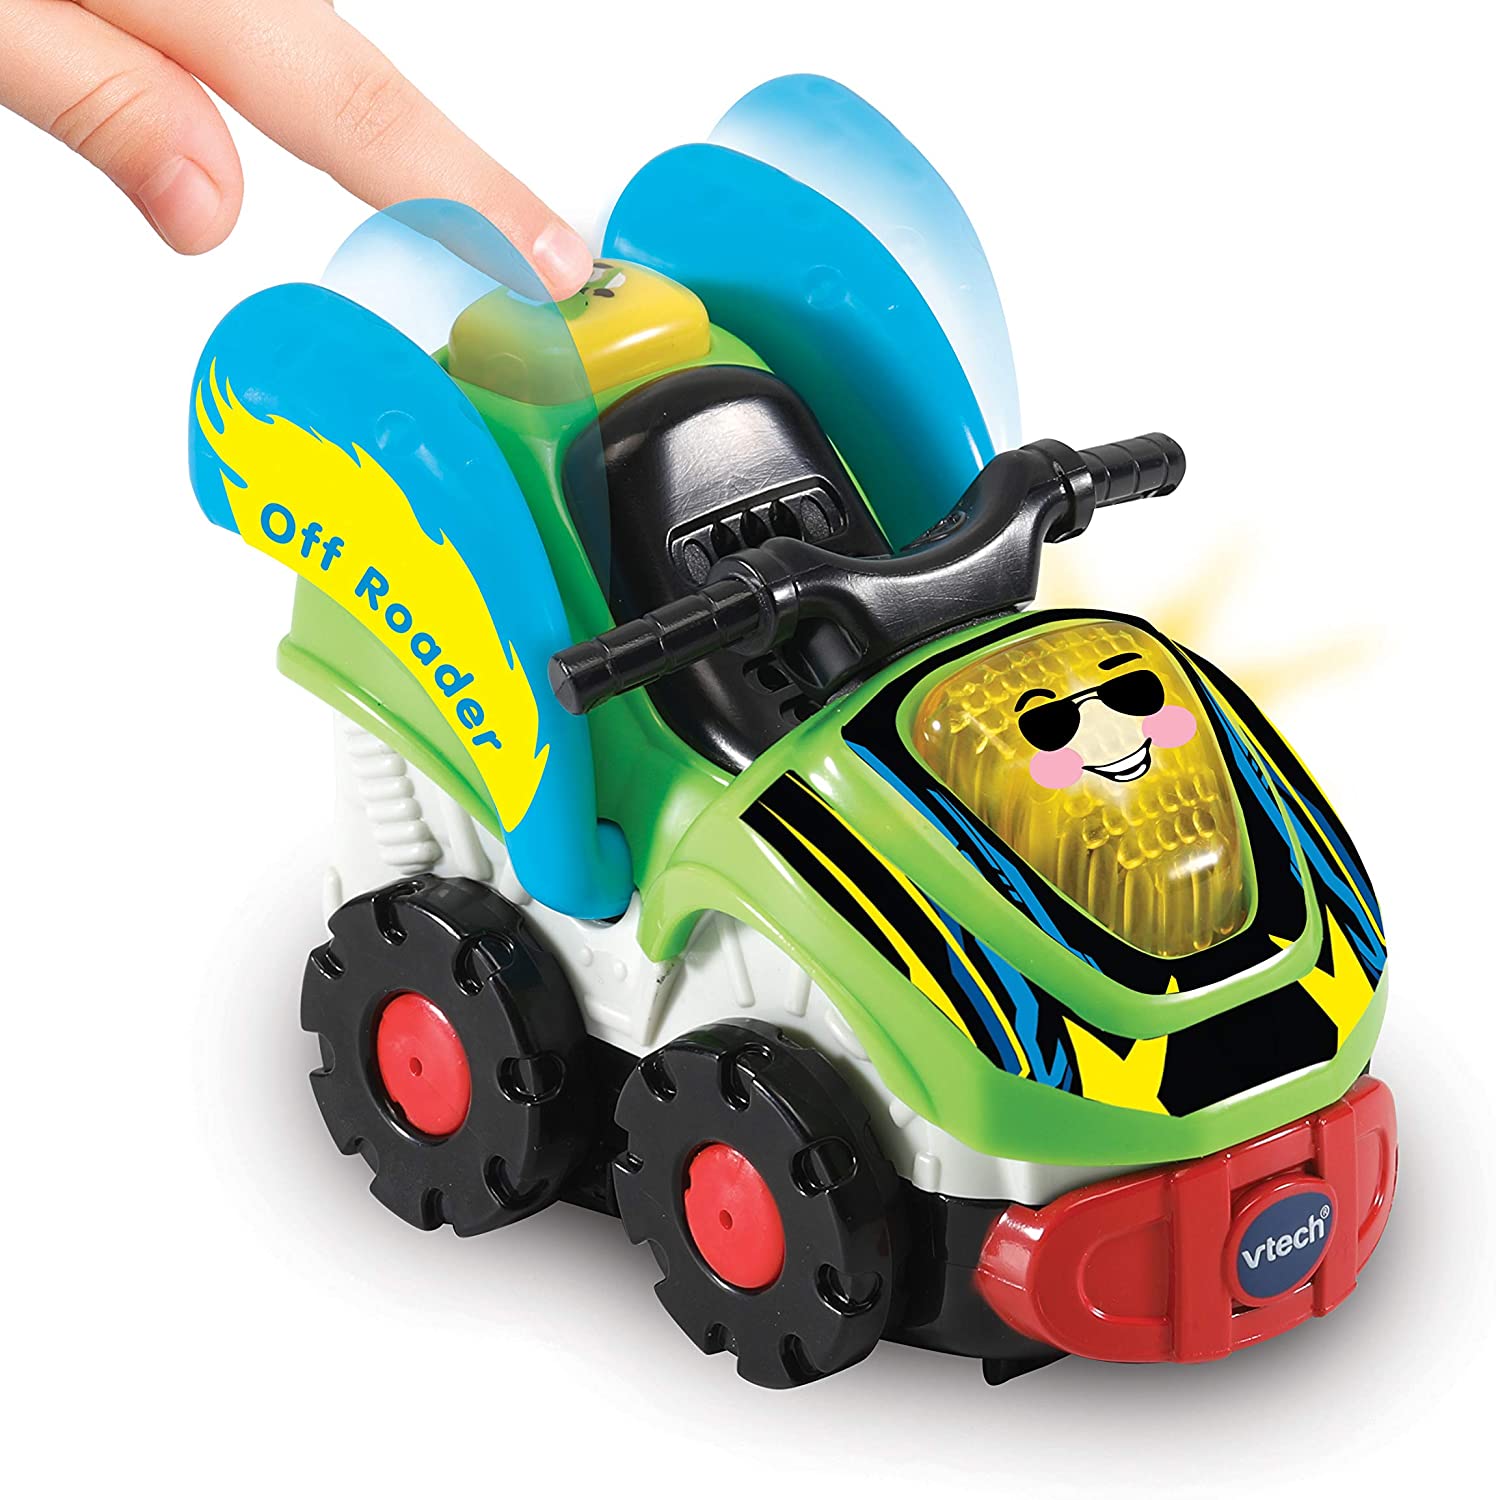 VTech Toot-Toot Drivers Off Roader